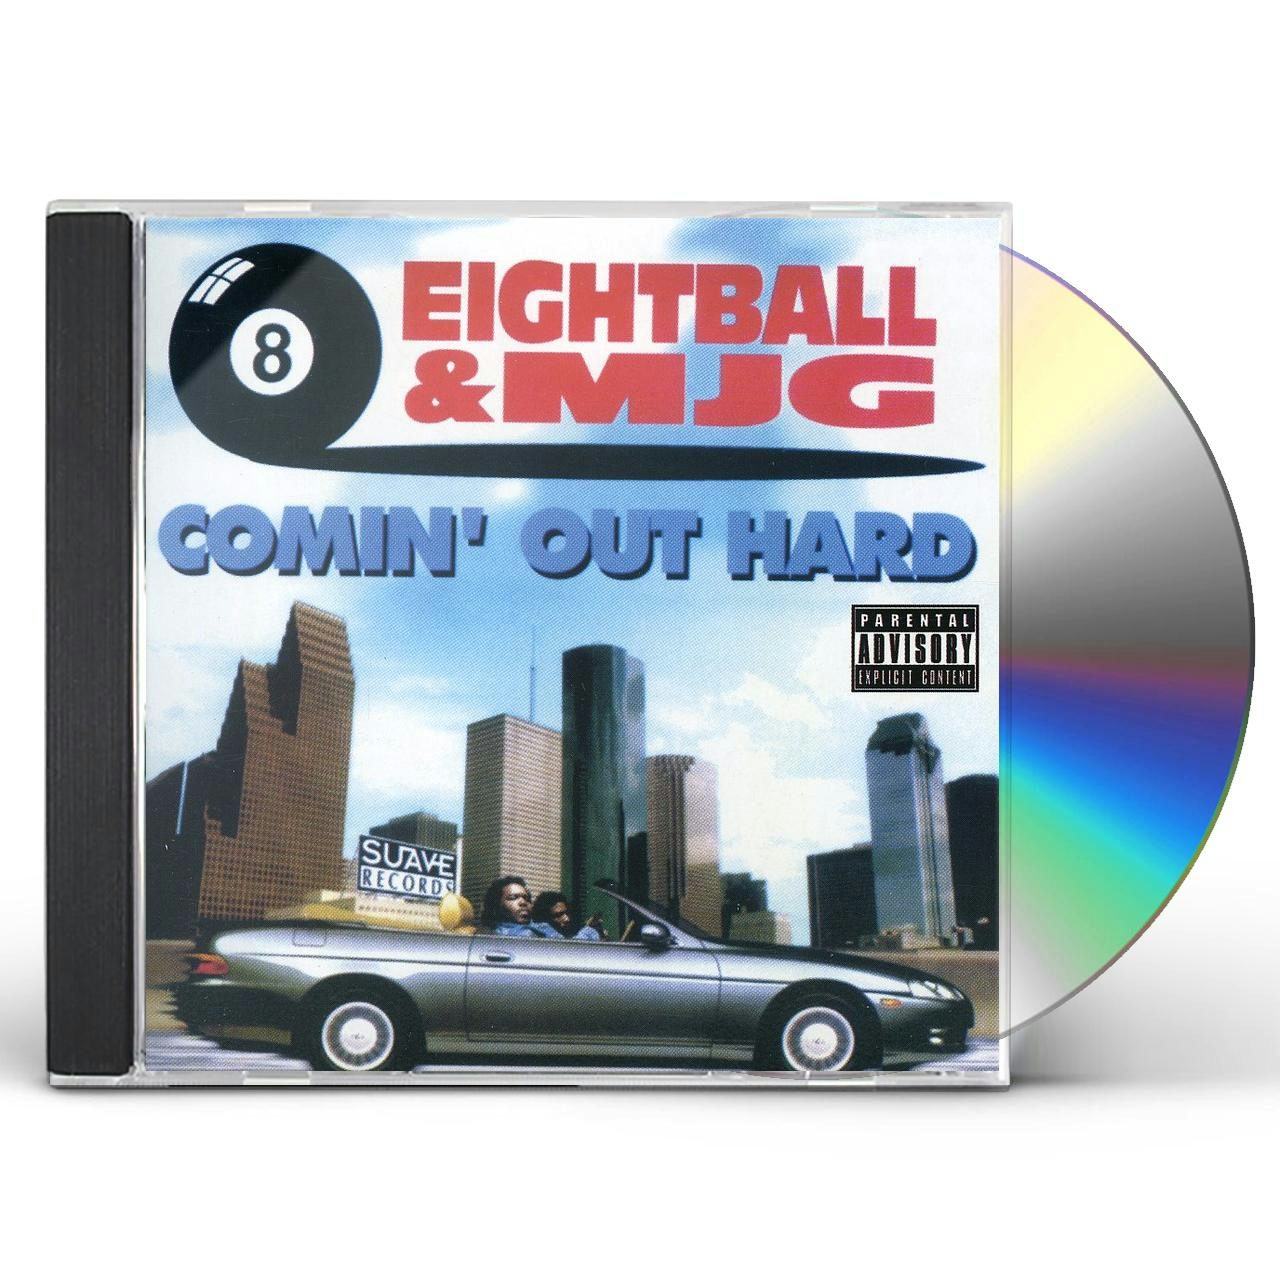 8 ball mjg comin out hard album mp3 download